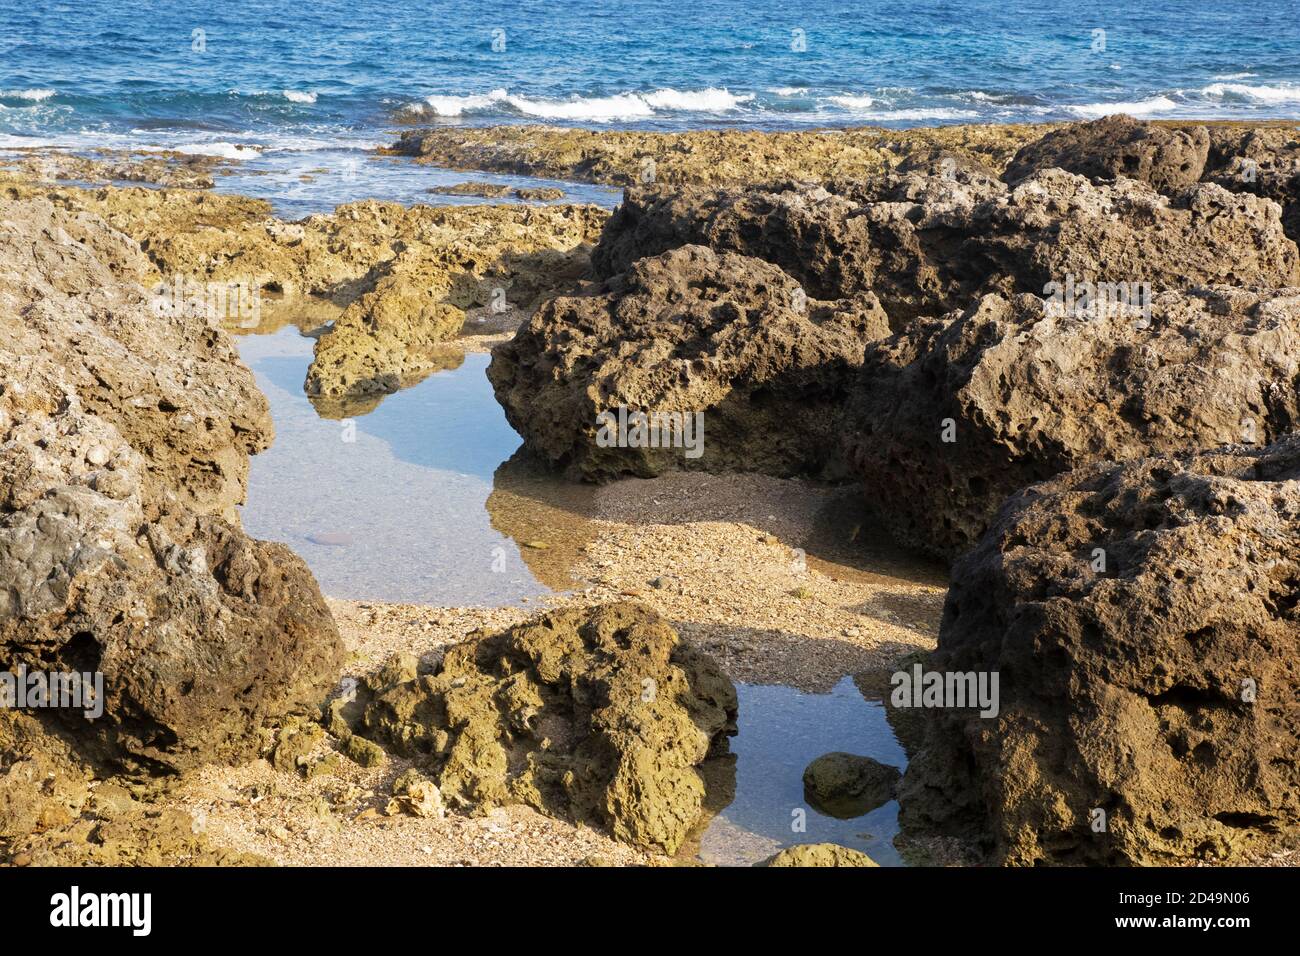 Unnamed beach of volcanic or Igneous rock on the coast of Taiwan, China Stock Photo